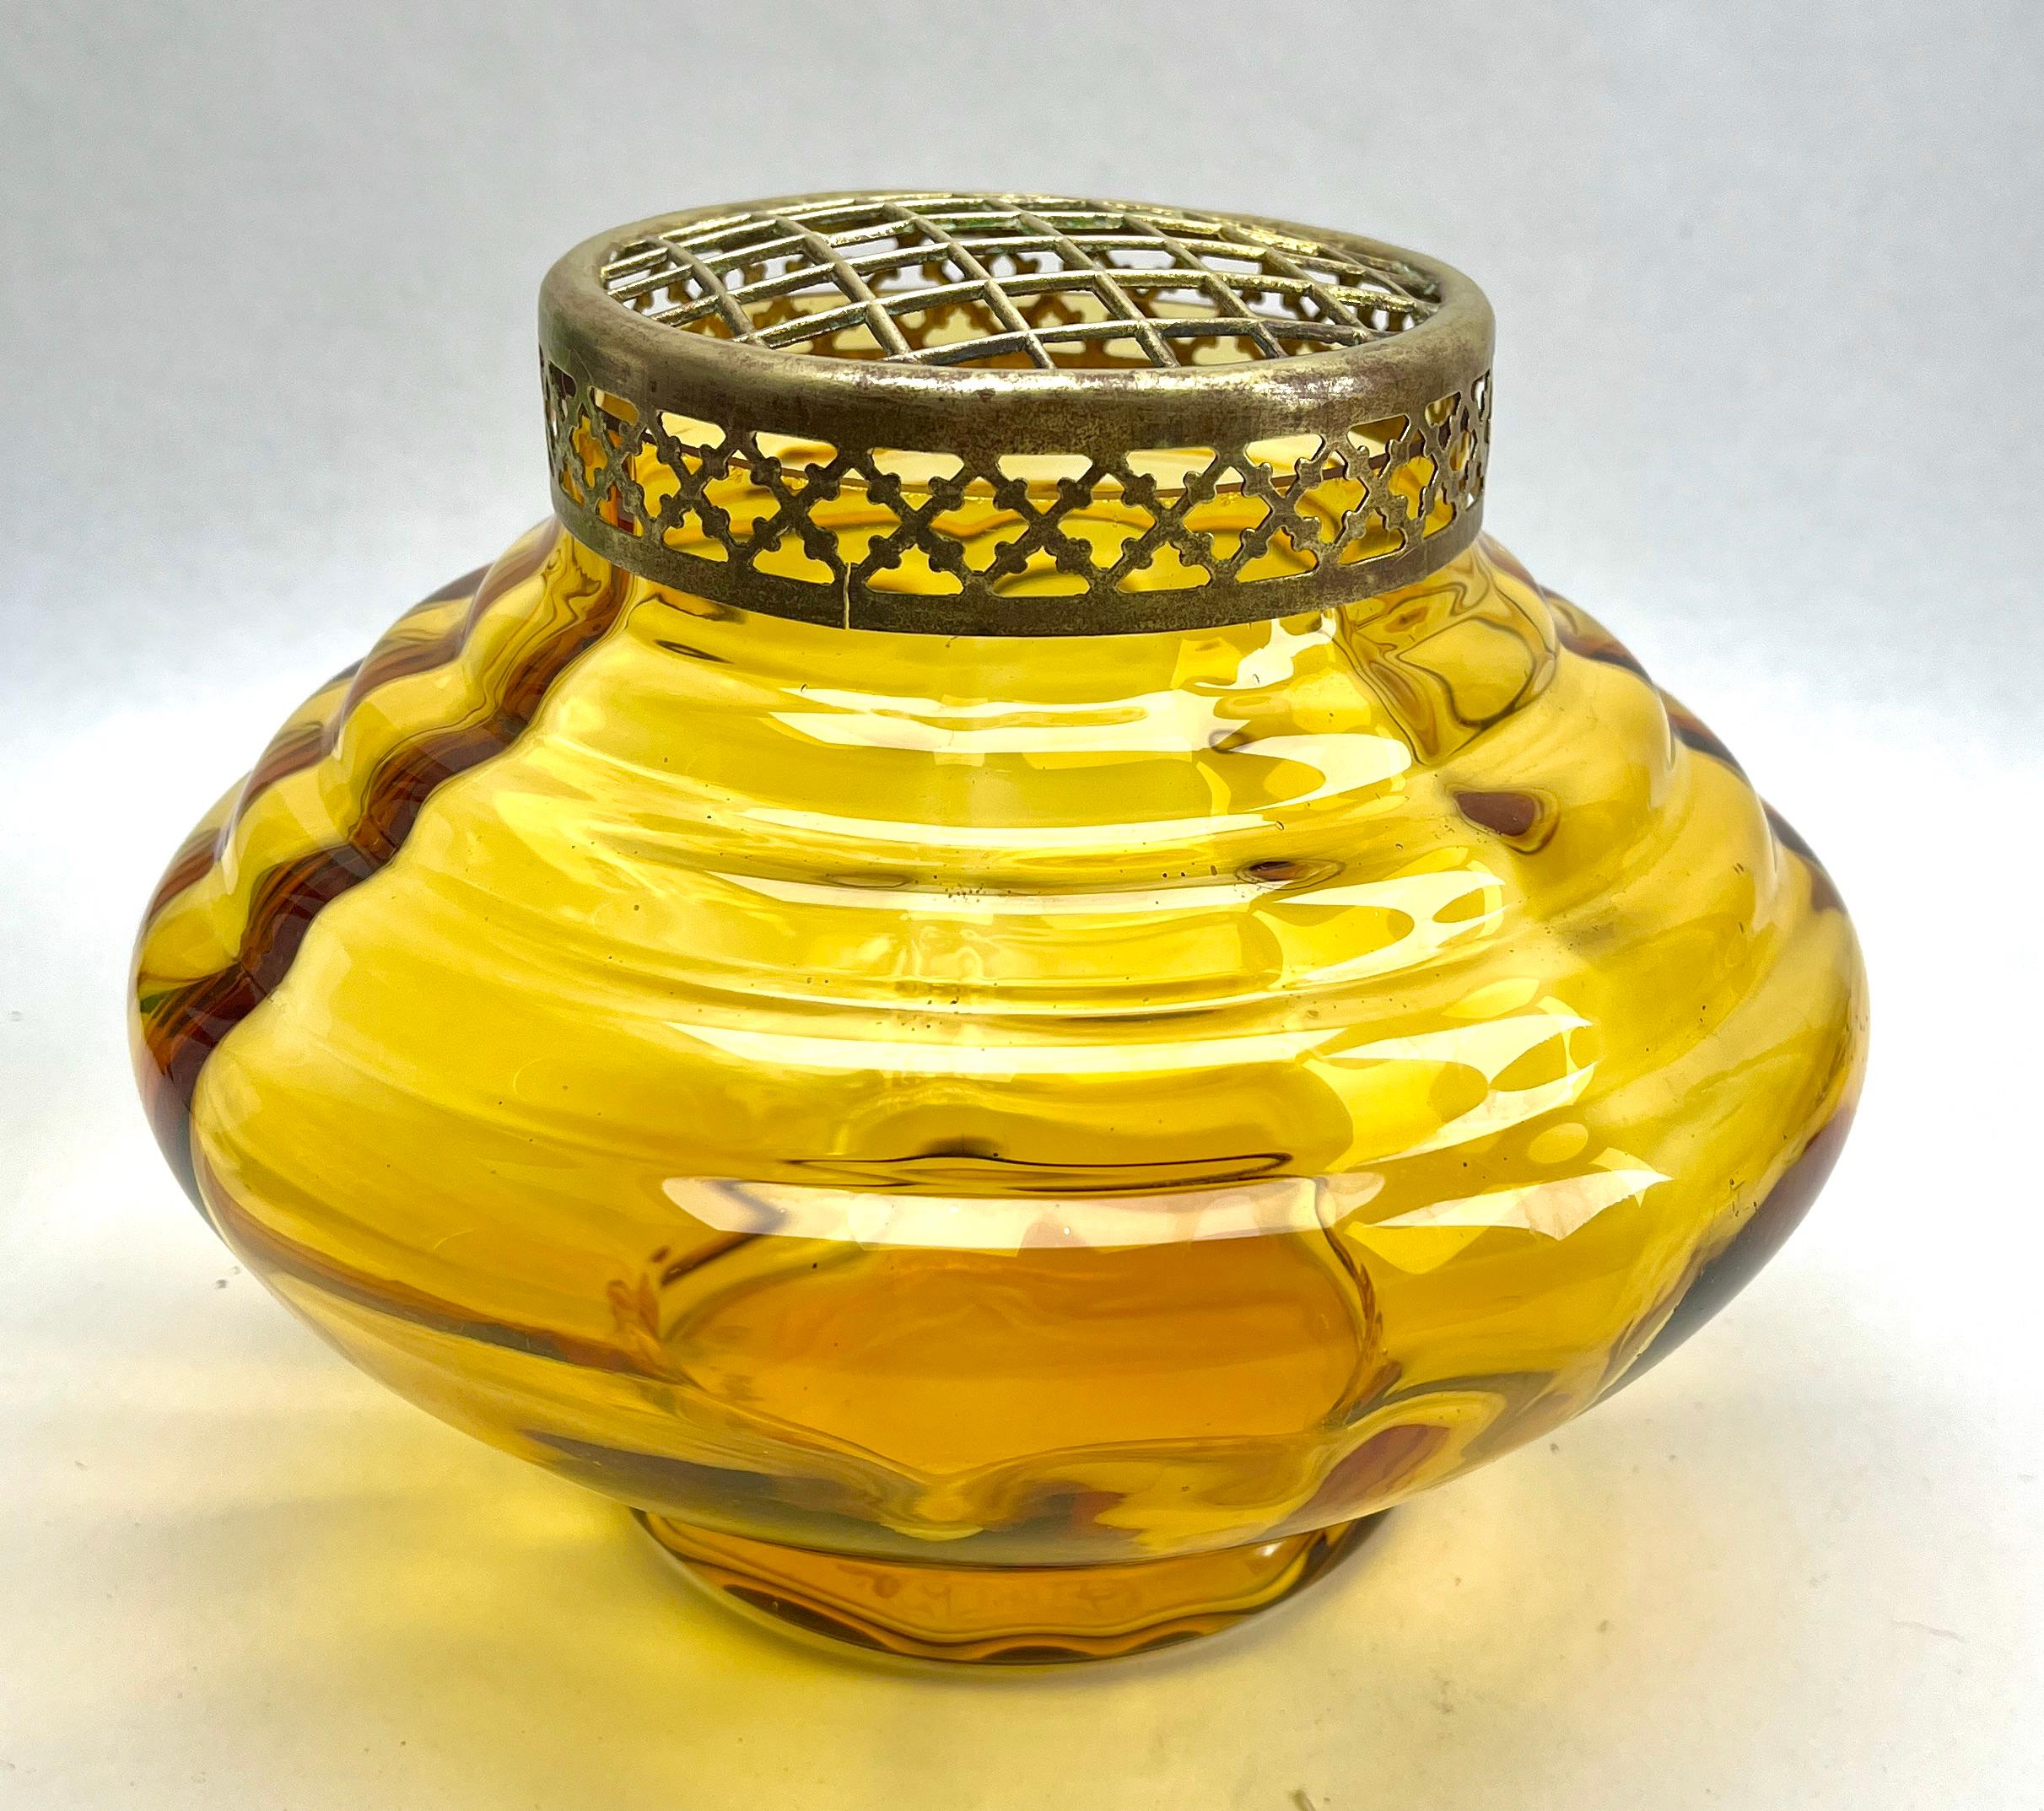 Doyen 'Pique Fleurs' Vase with Grille, Late 1930s

Subtle, hand blown glass vase in the Art Deco style. This design for vases is often called 'Pique fleurs' or 'rose-bowl' and is supplied with a fitted metal grille to support stems in an